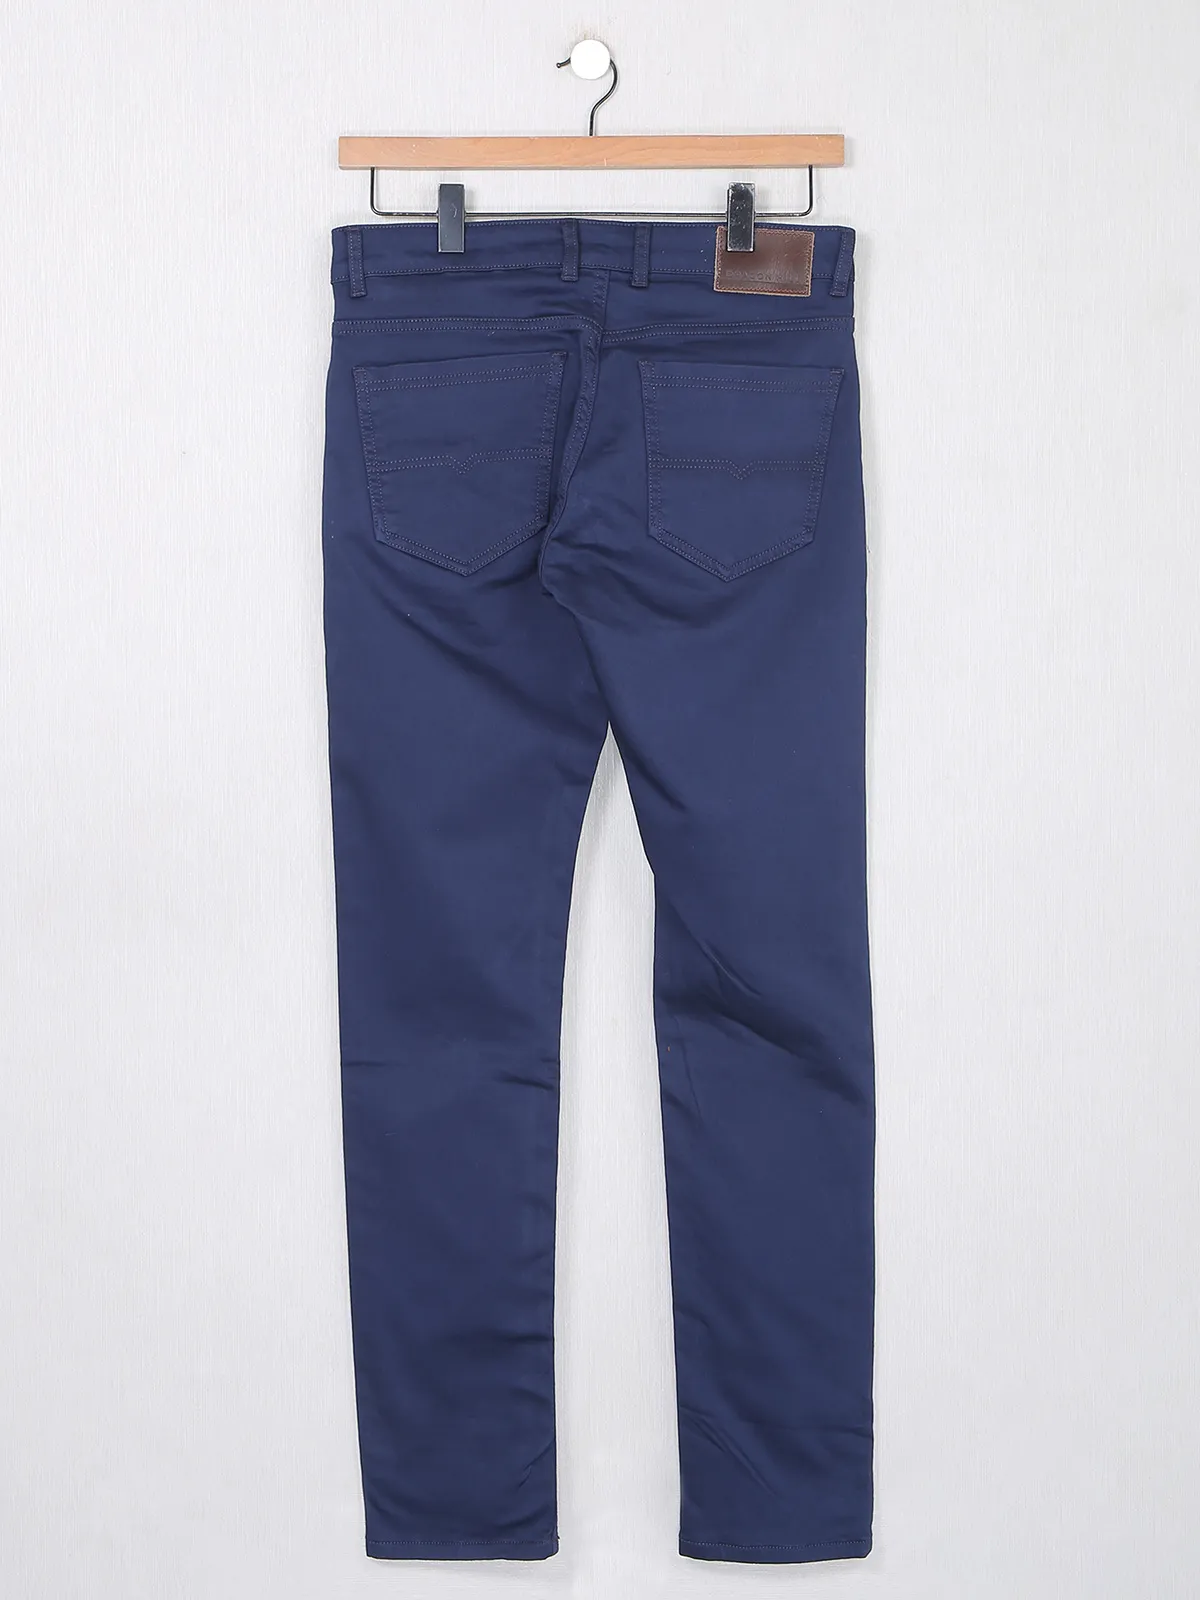 Dragon Hill solid cotton jeans in light navy